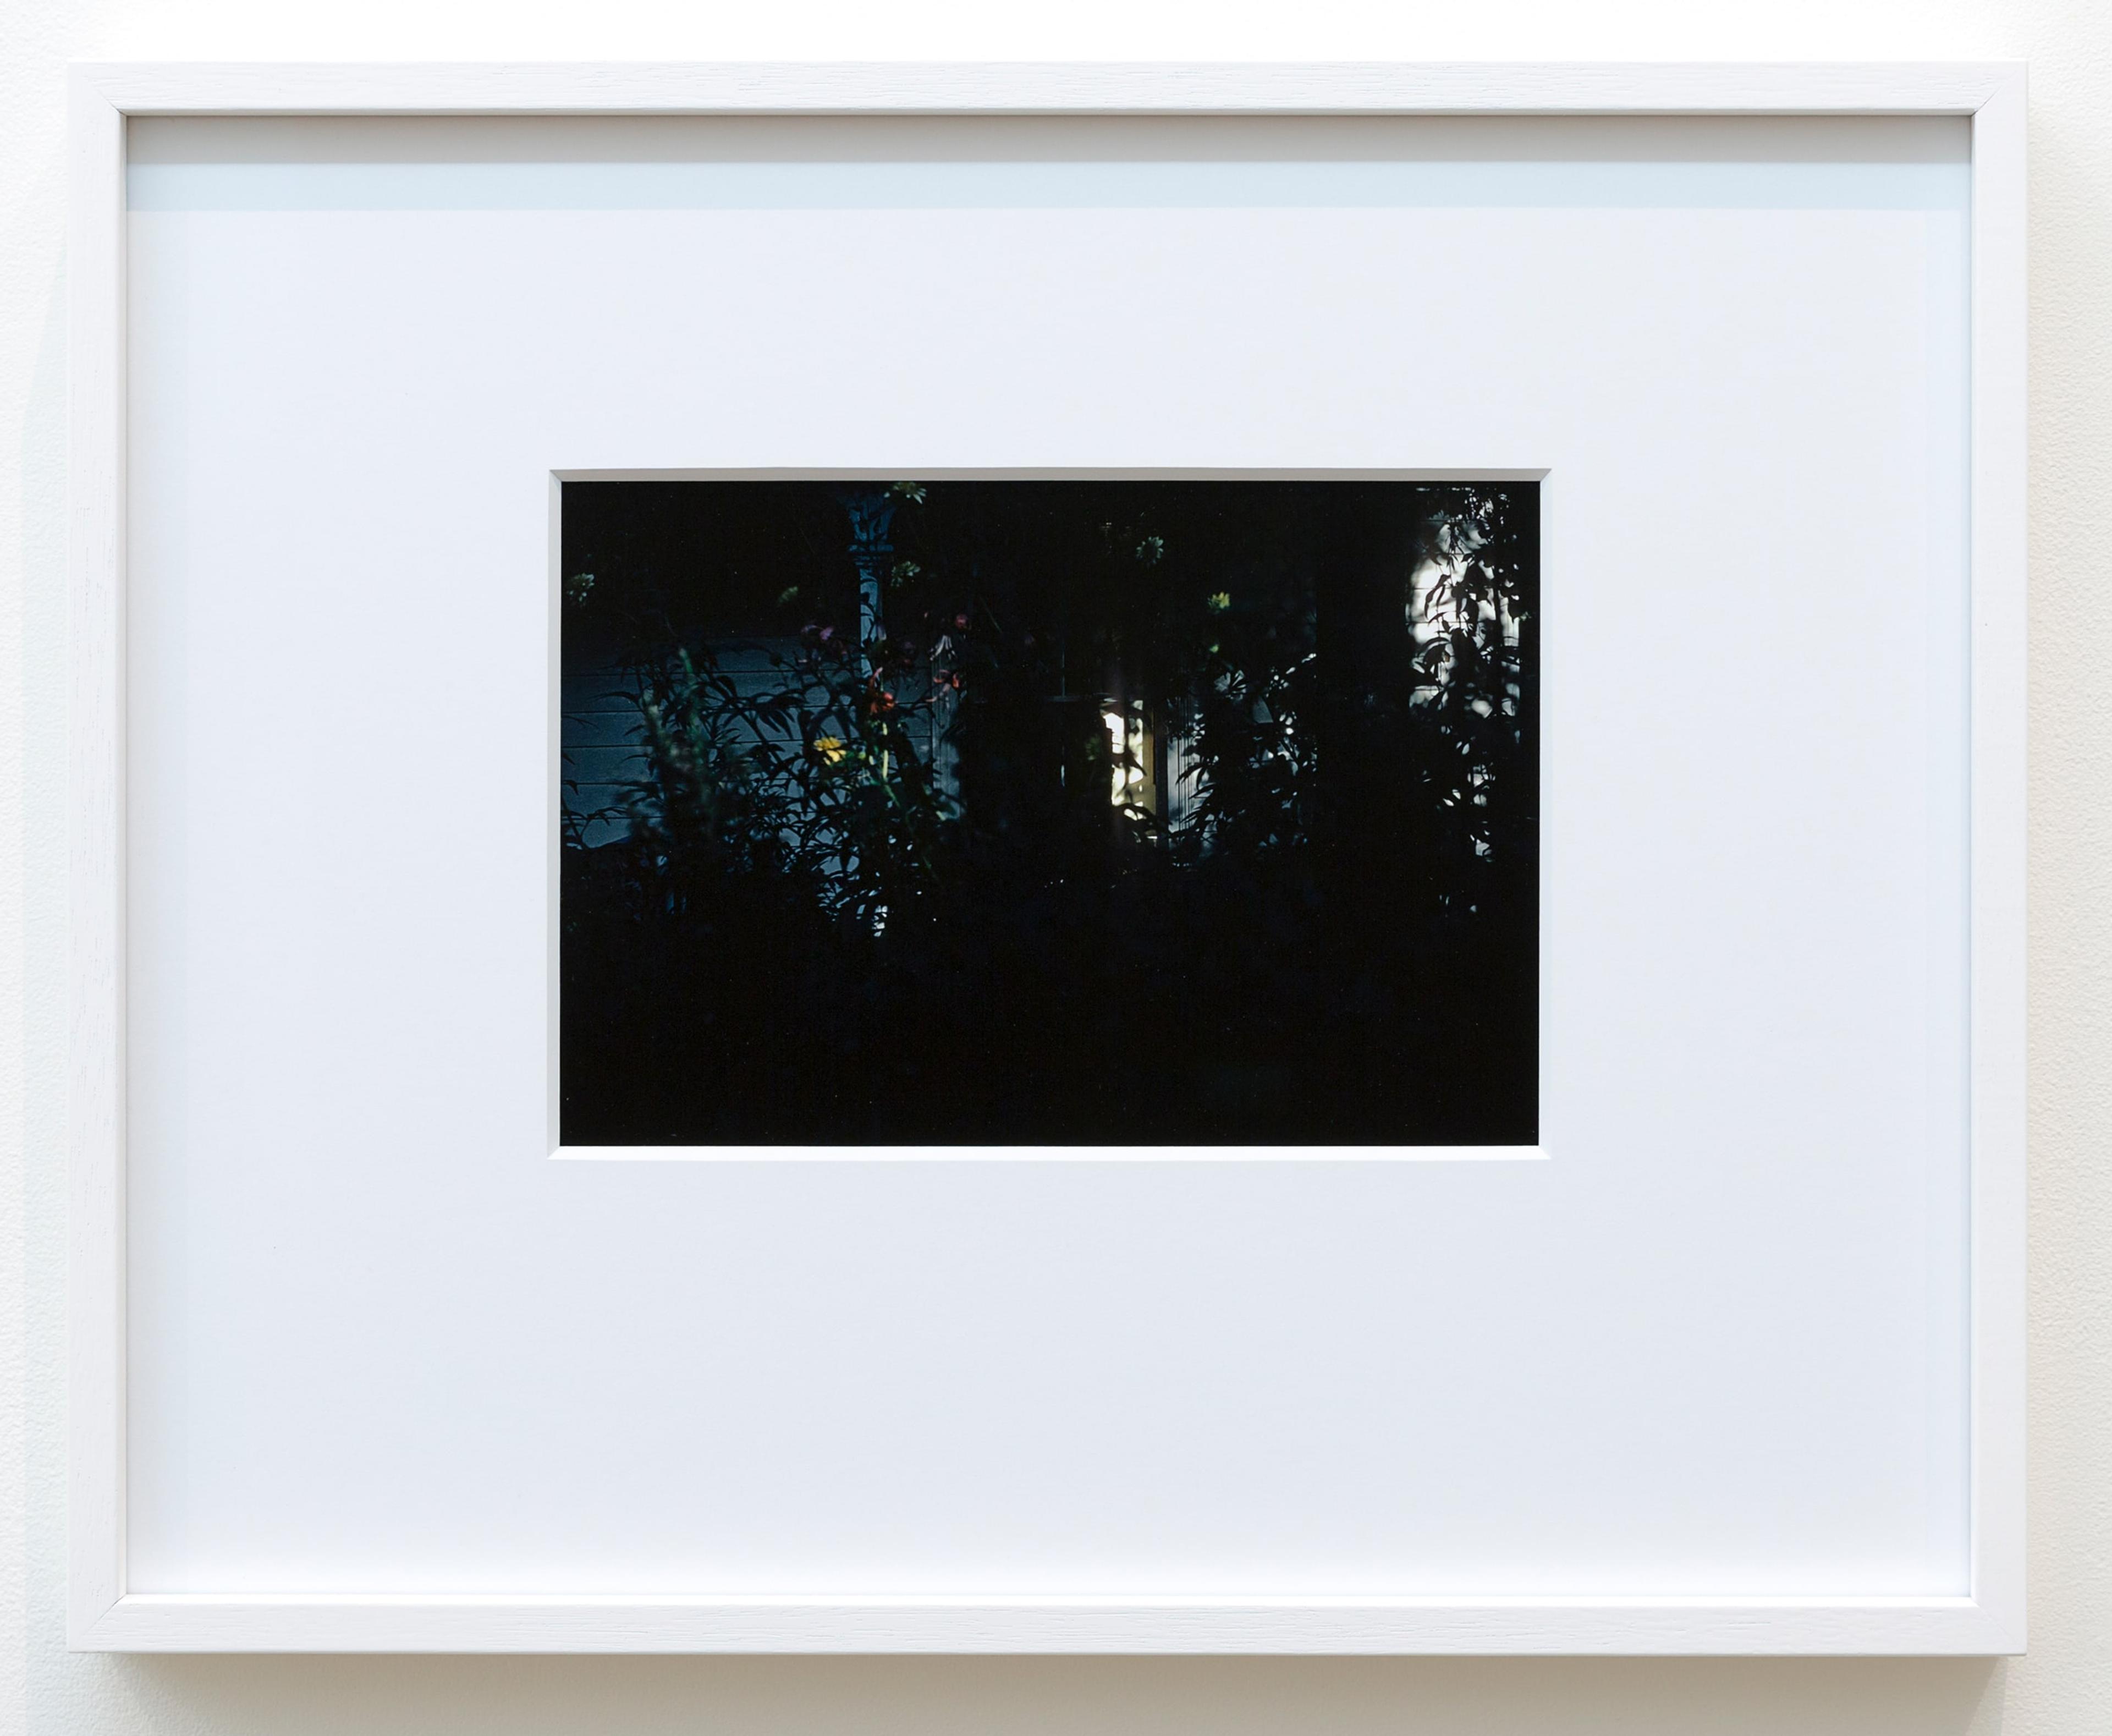 Joanna Margaret Paul, Untitled, 1976/2013, Archival pigment print (edition of 3), Courtesy of the artist’s estate and Robert Heald Gallery, Wellington, inFragments of a World, curated by Sandy Callister, Adam Art Gallery Te Pātaka Toi, Victoria University of Wellington (photo: Shaun Waugh)